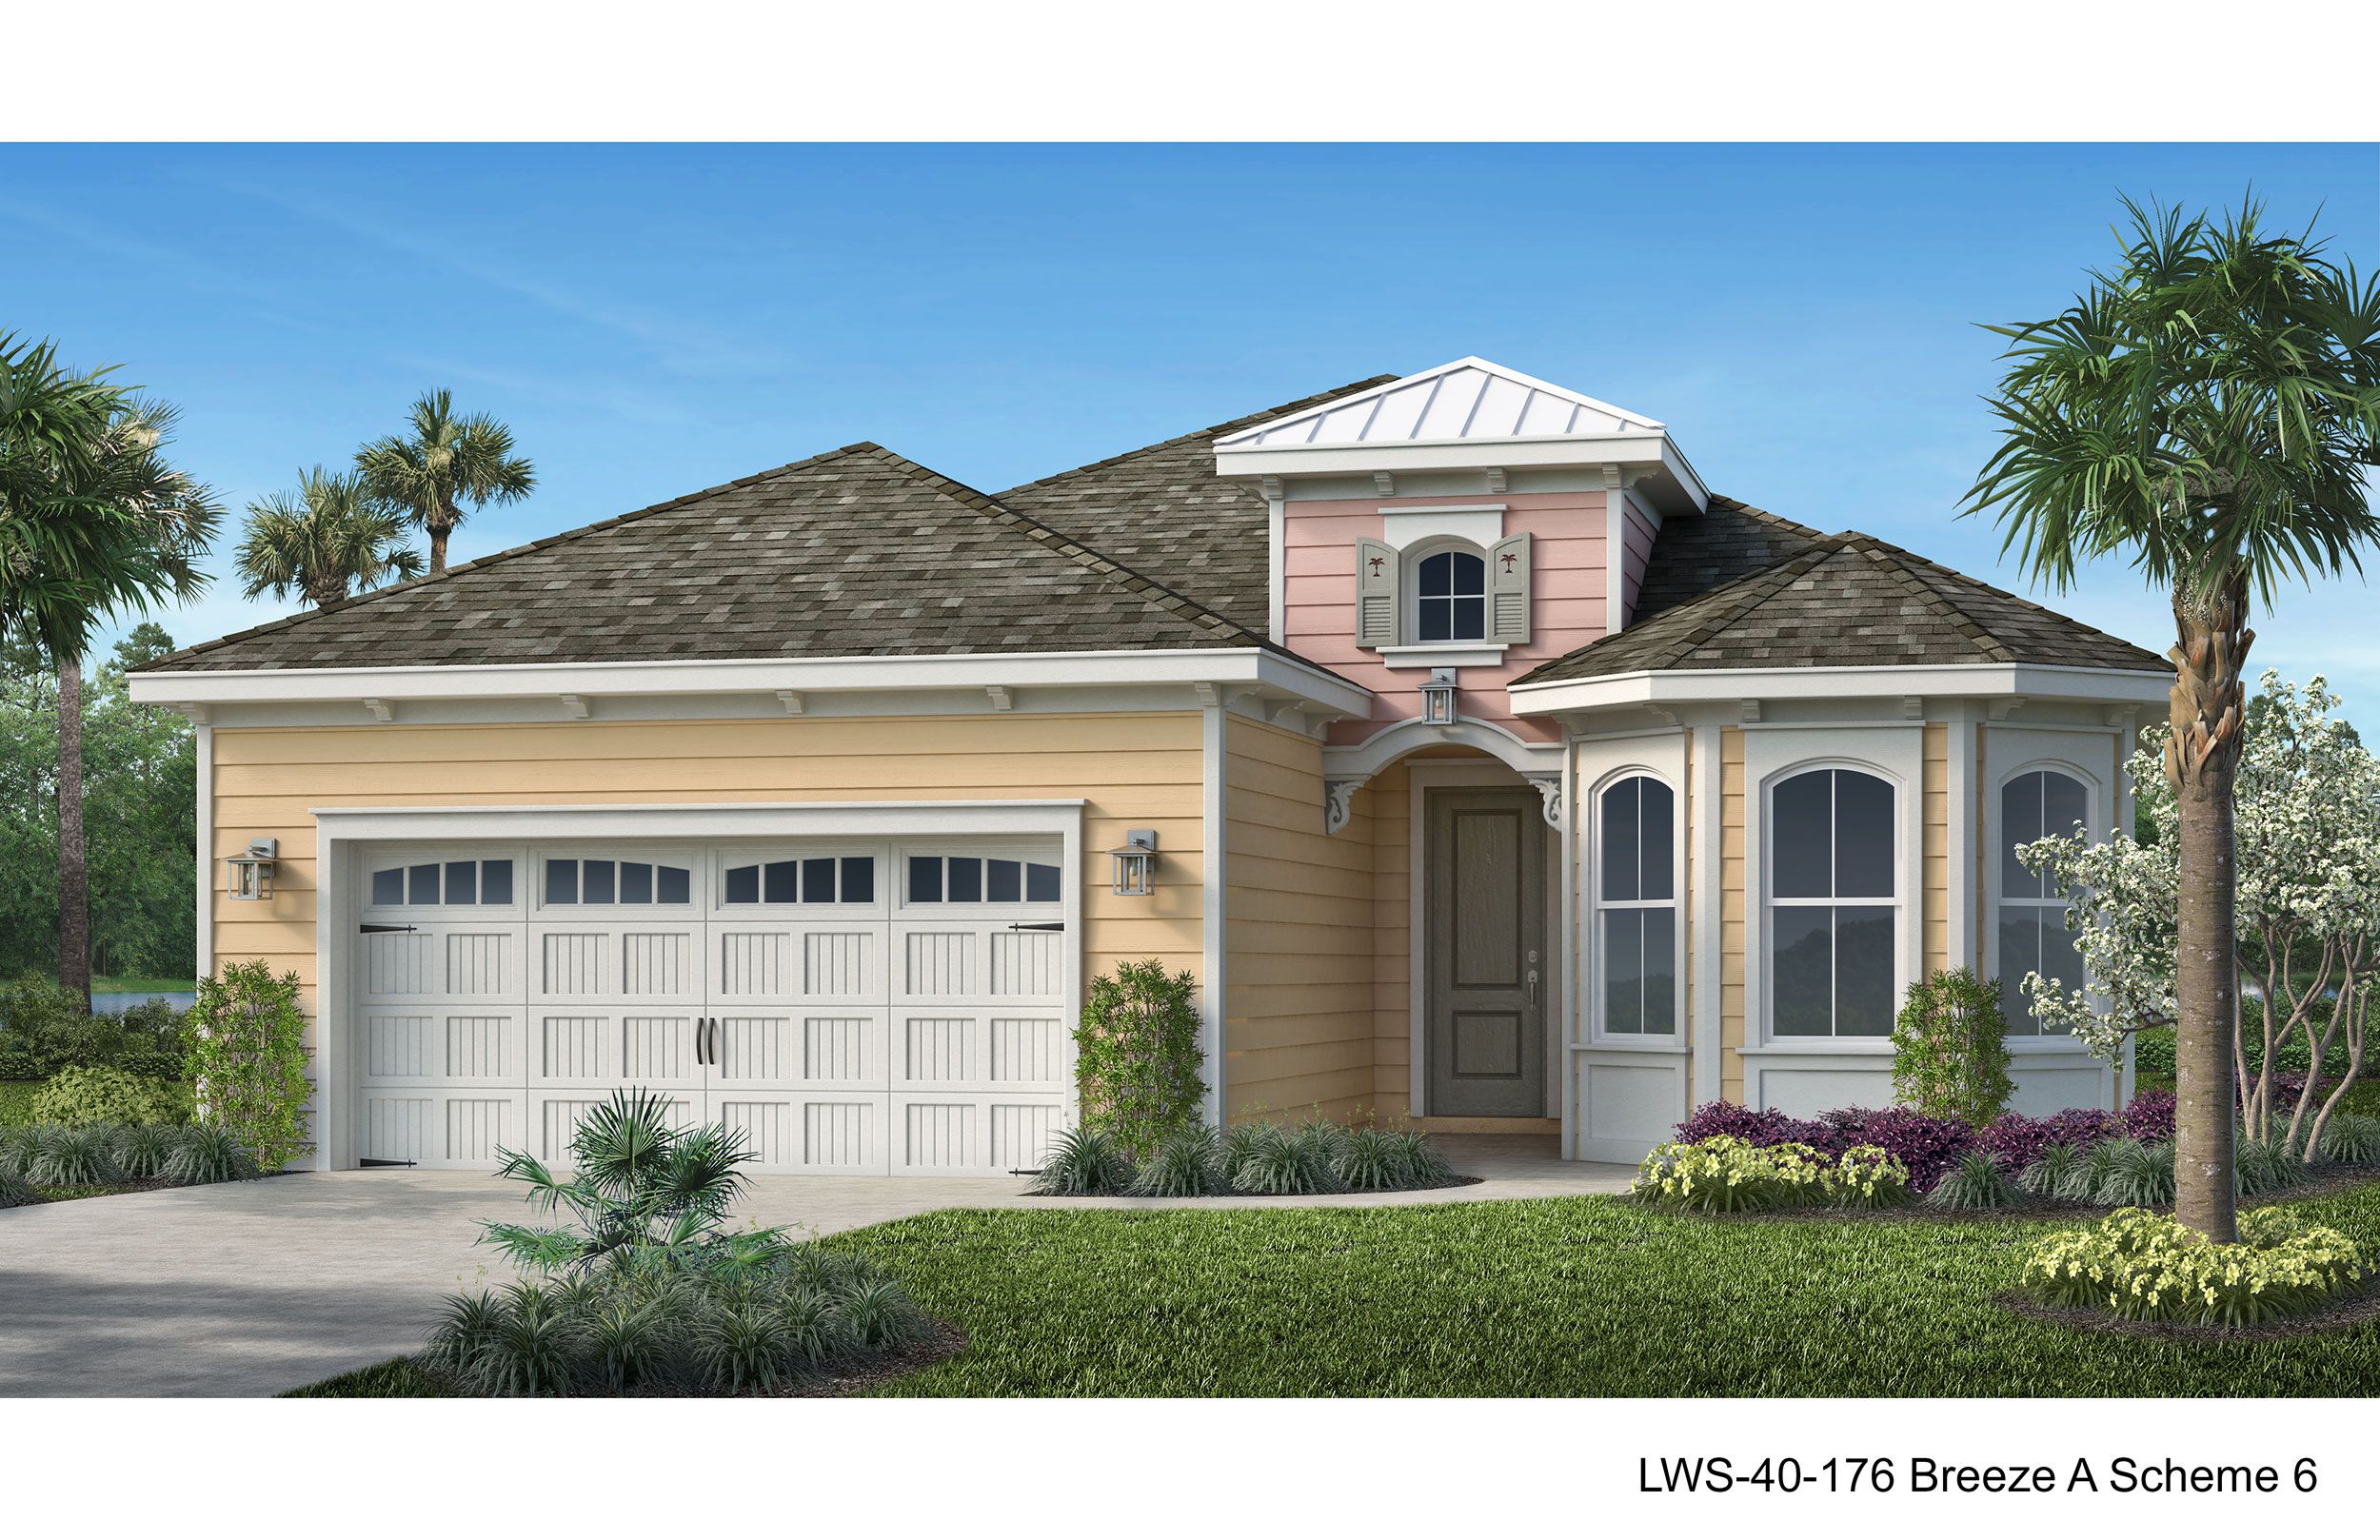 Breeze Bay Plan At Latitude Margaritaville Watersound In Panama City Beach Fl By Minto Communities